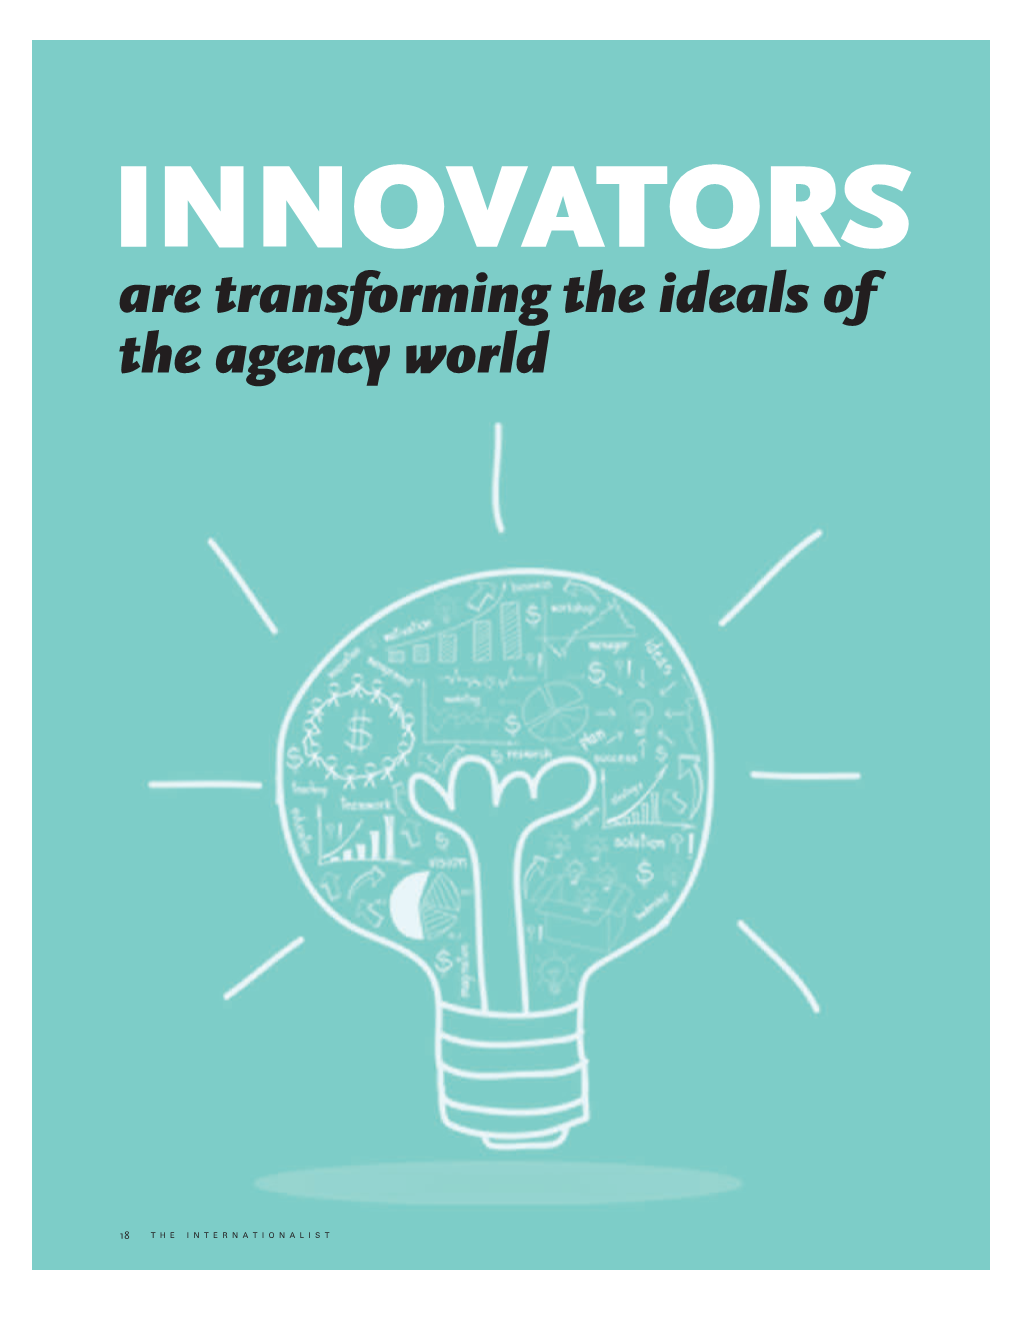 Are Transforming the Ideals of the Agency World